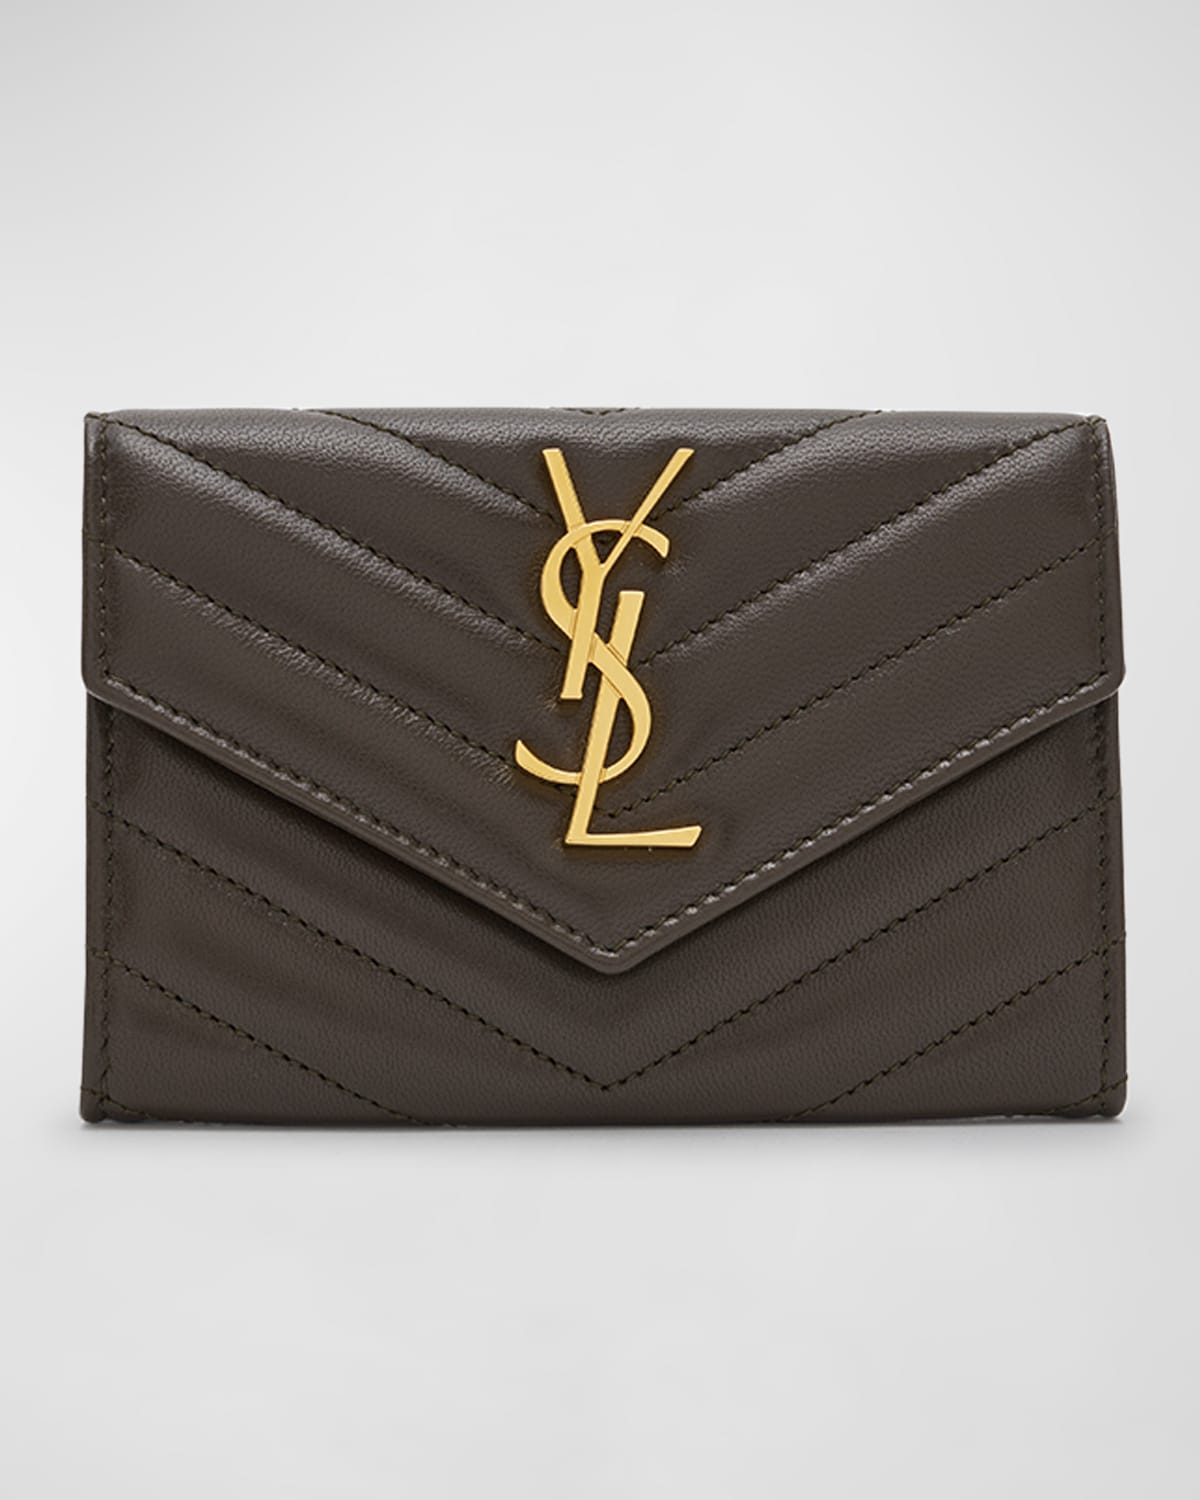 SAINT LAURENT SMALL YSL ENVELOPE QUILTED WALLET